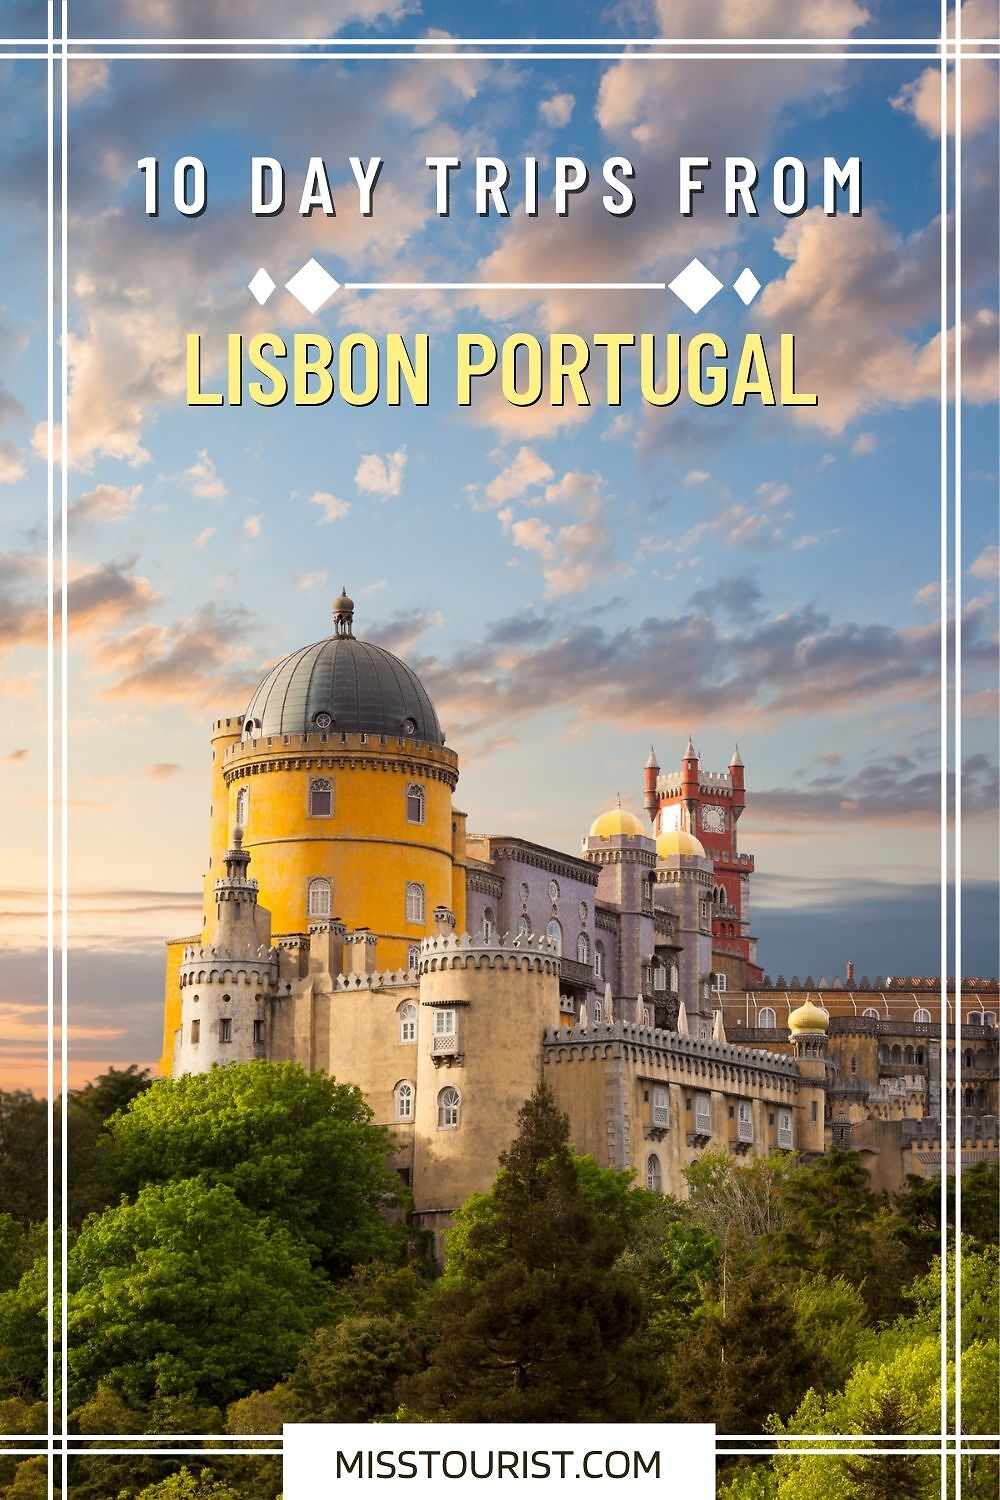 10 day trips from lisbon pin 2